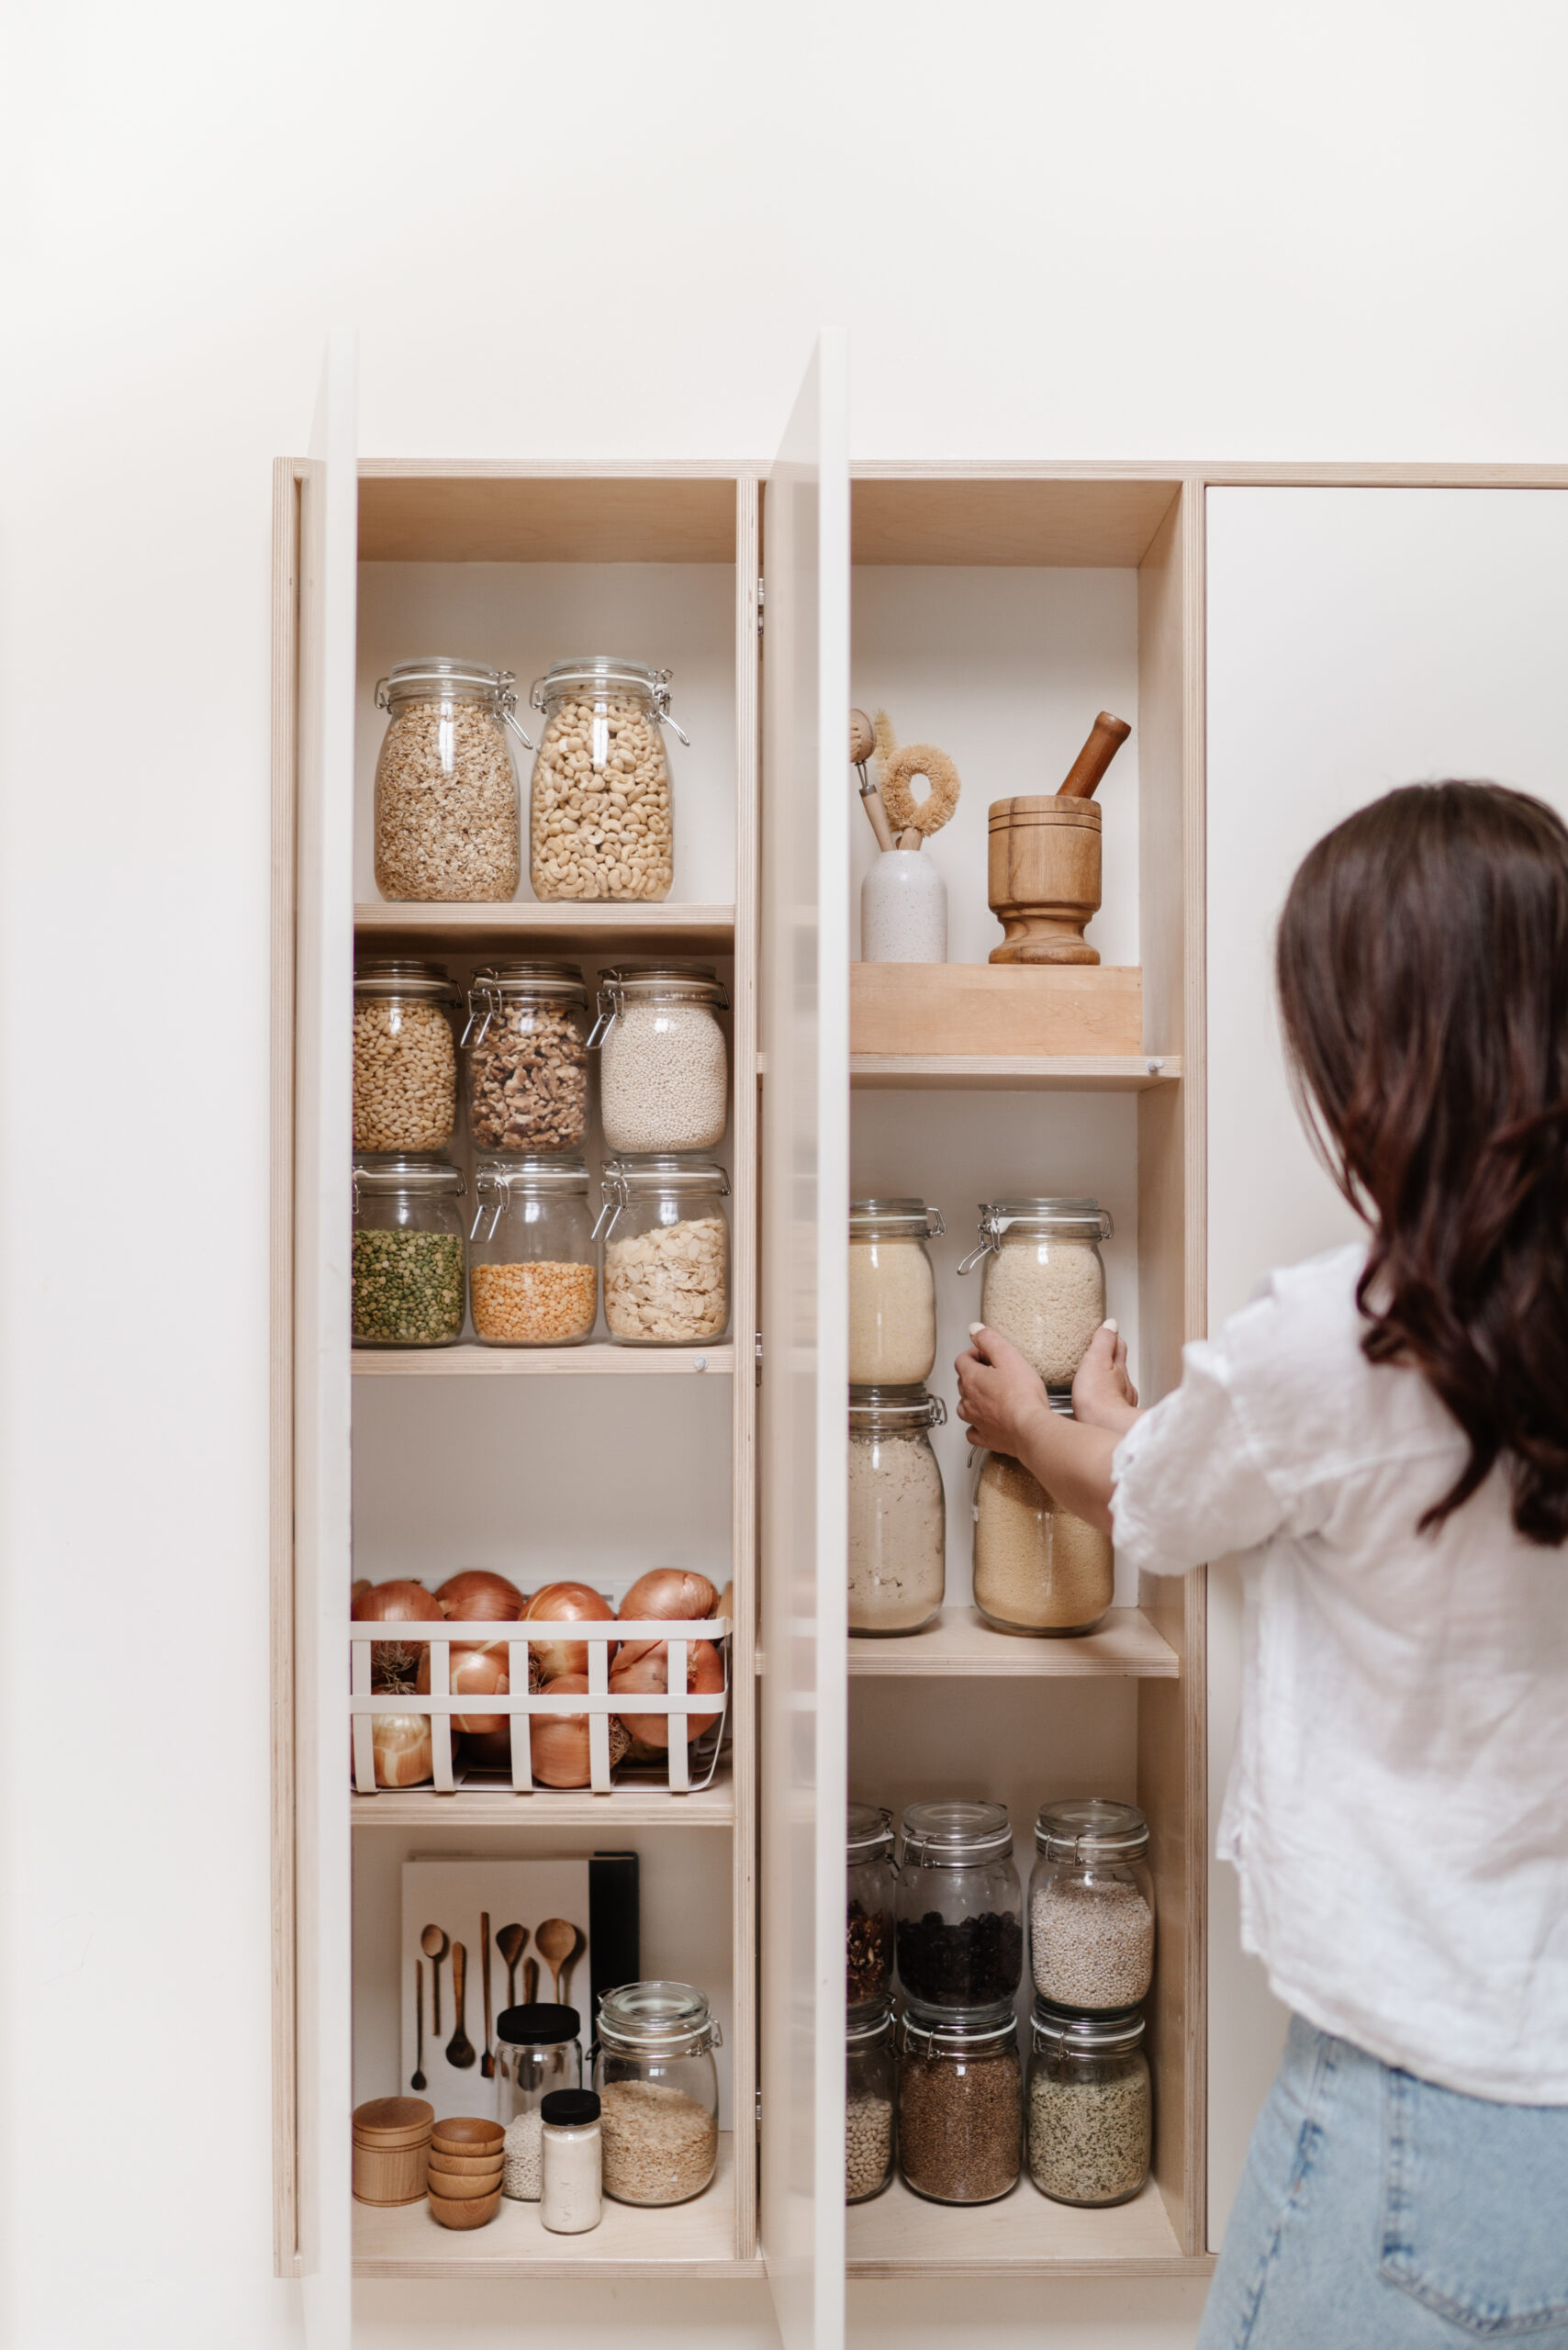 How to Organize Your Kitchen: 7 Ideas You Should Know